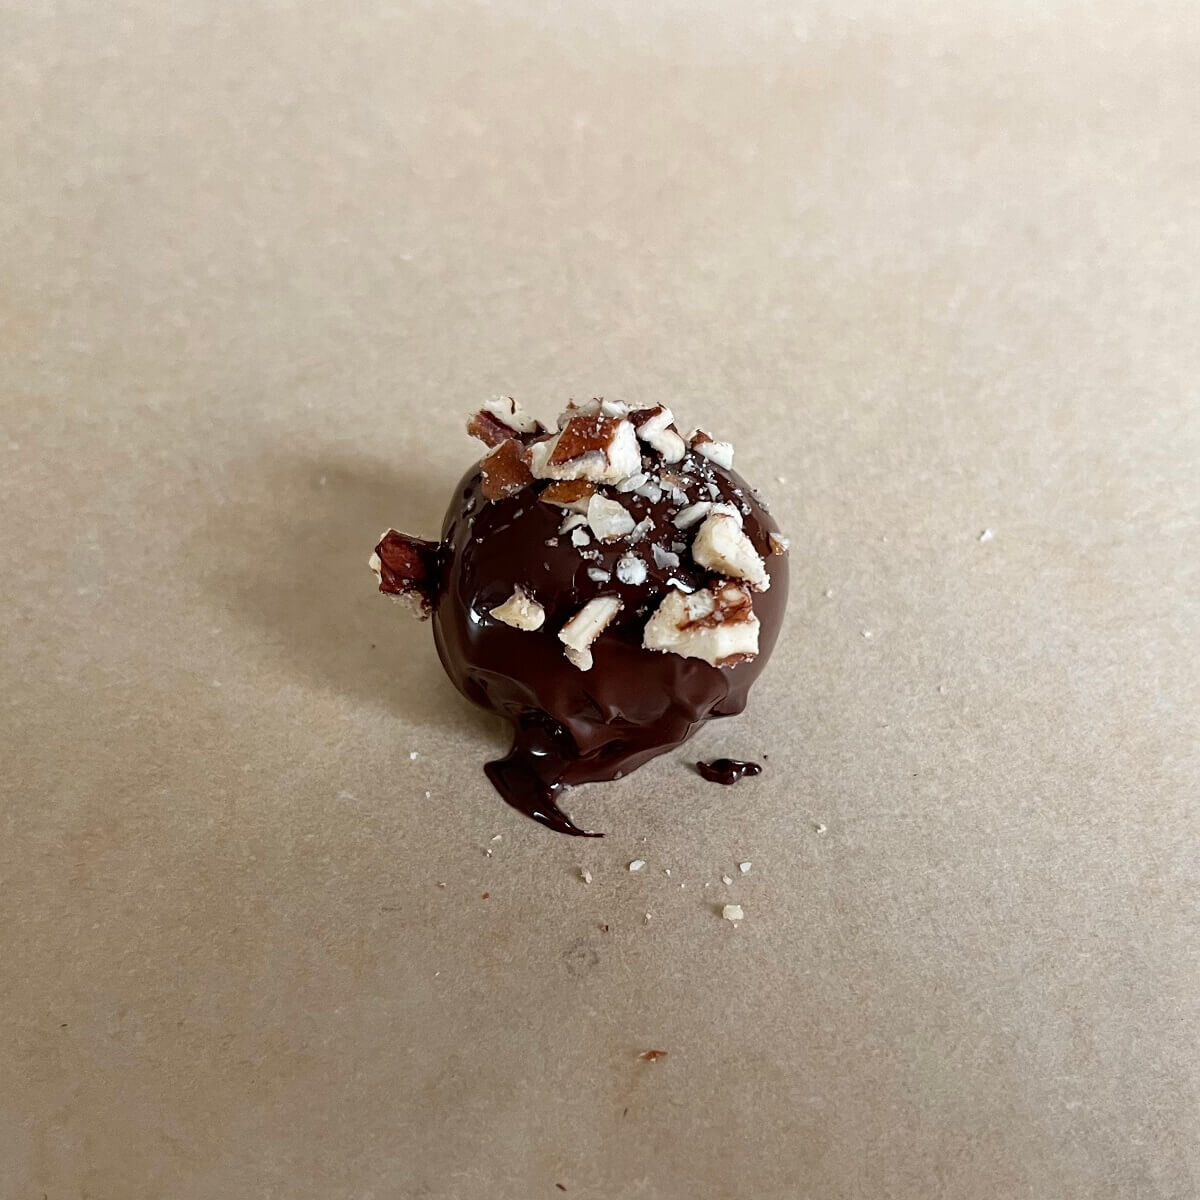 A chocolate dipped grape sprinkled with finely chopped nuts on a piece of parchment paper.